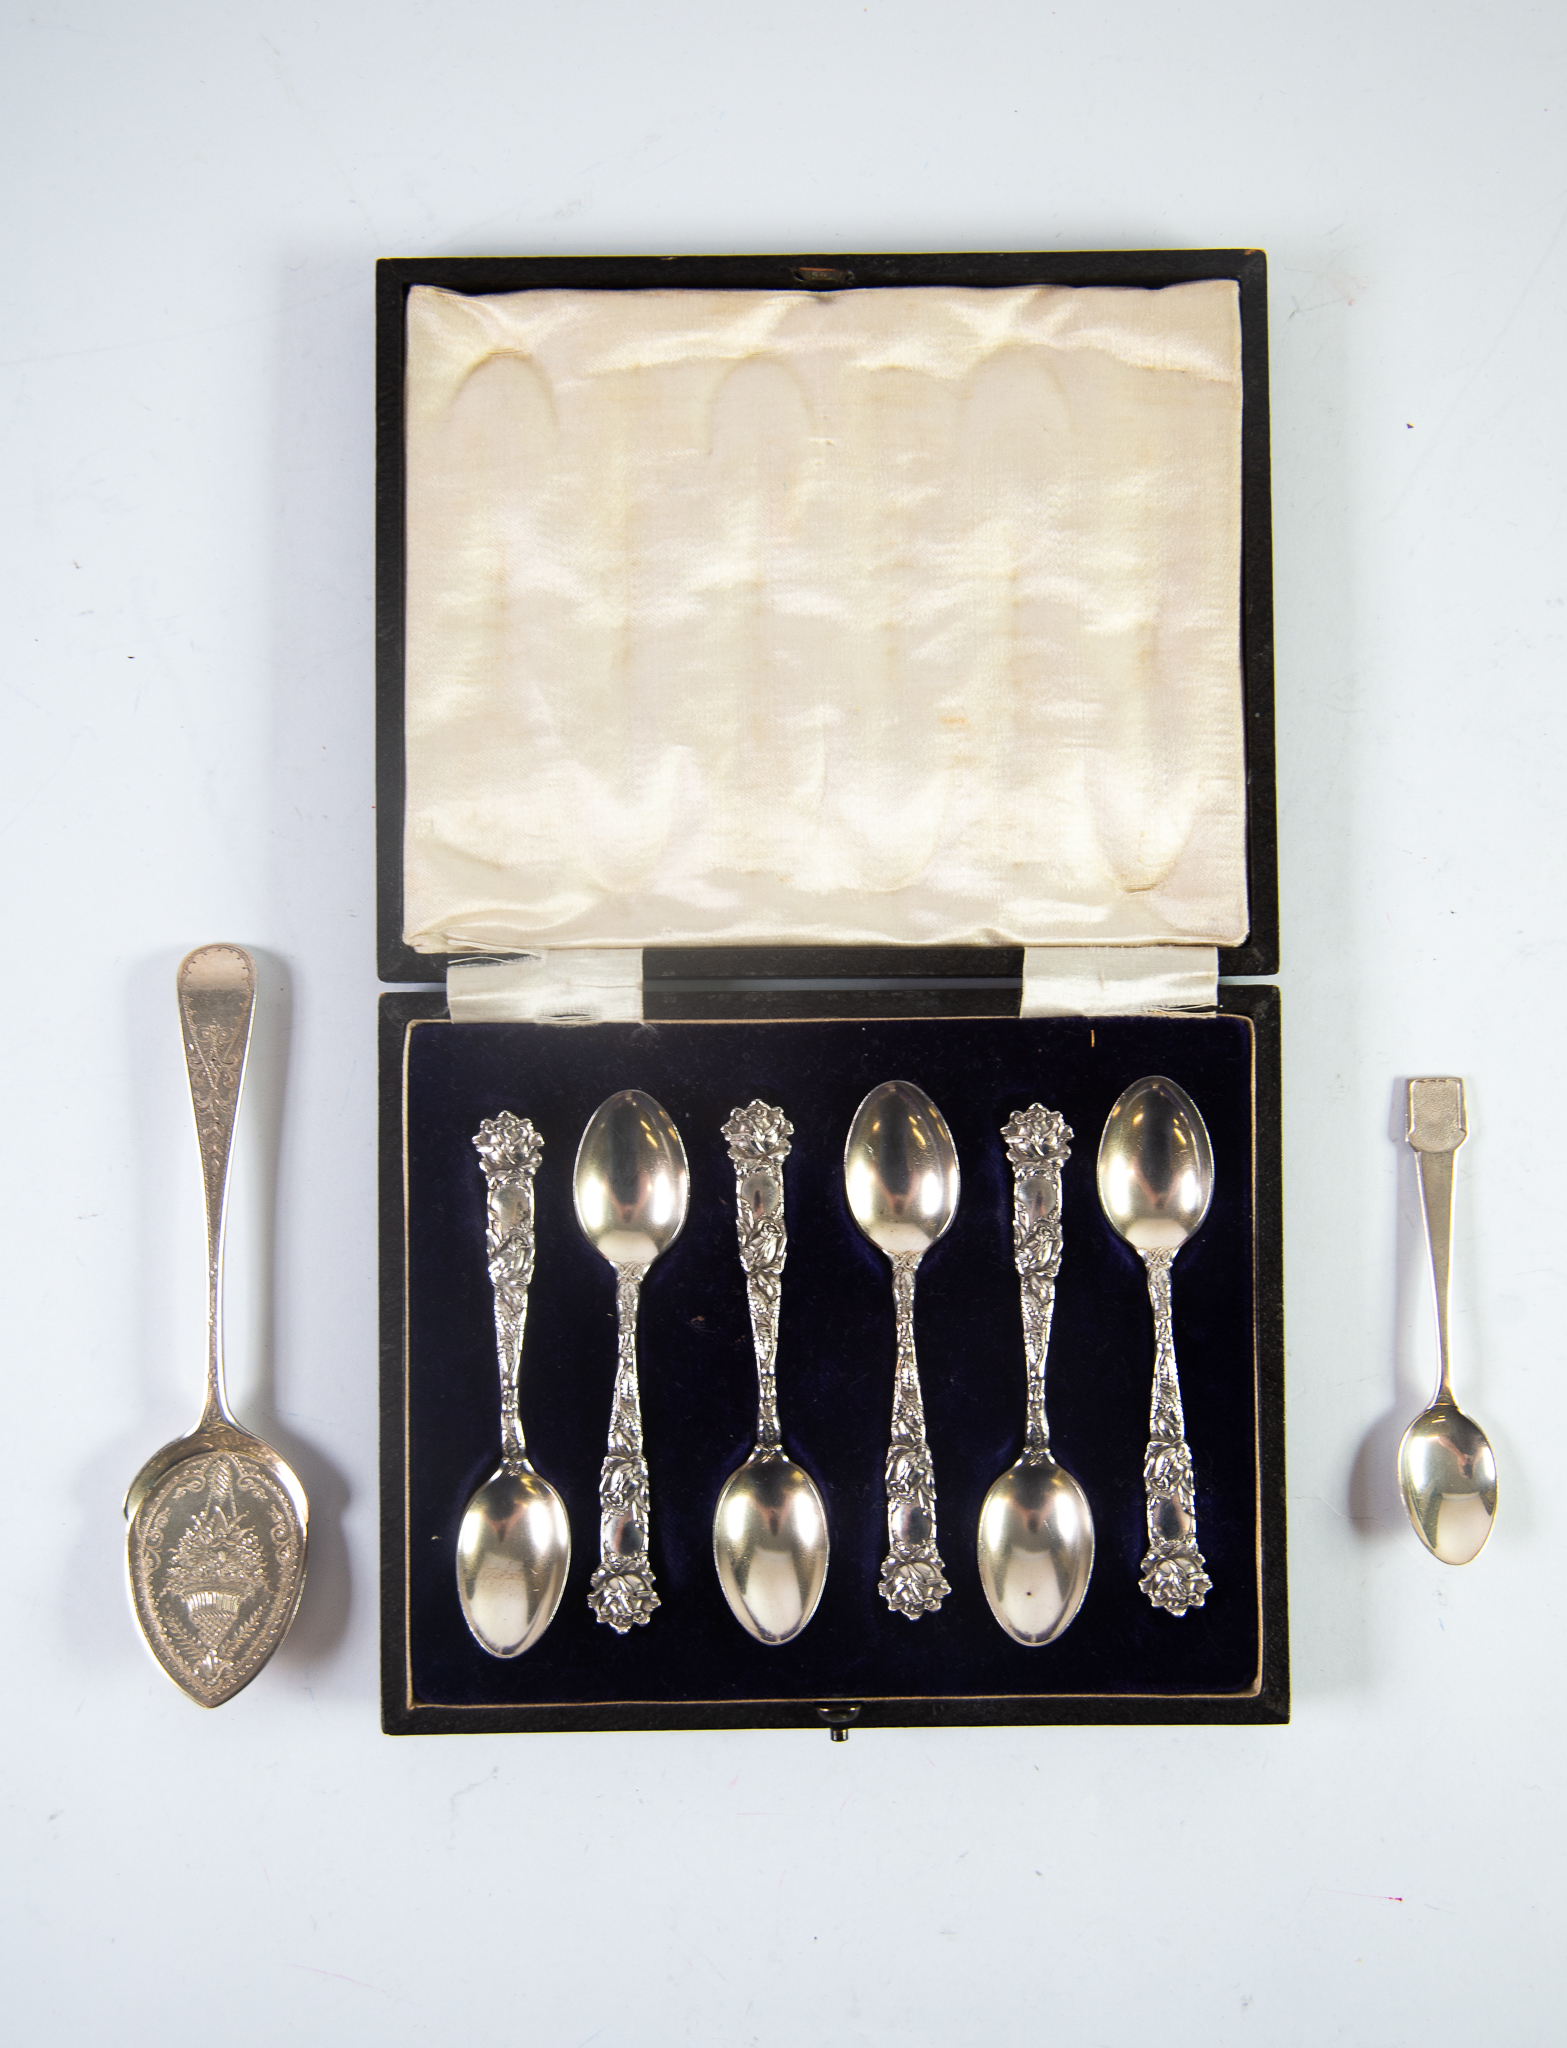 A CASED SET OF SIX PROBABLY AMERICAN 'STERLING' SILVER TEASPOONS with floral stamped handles; also a